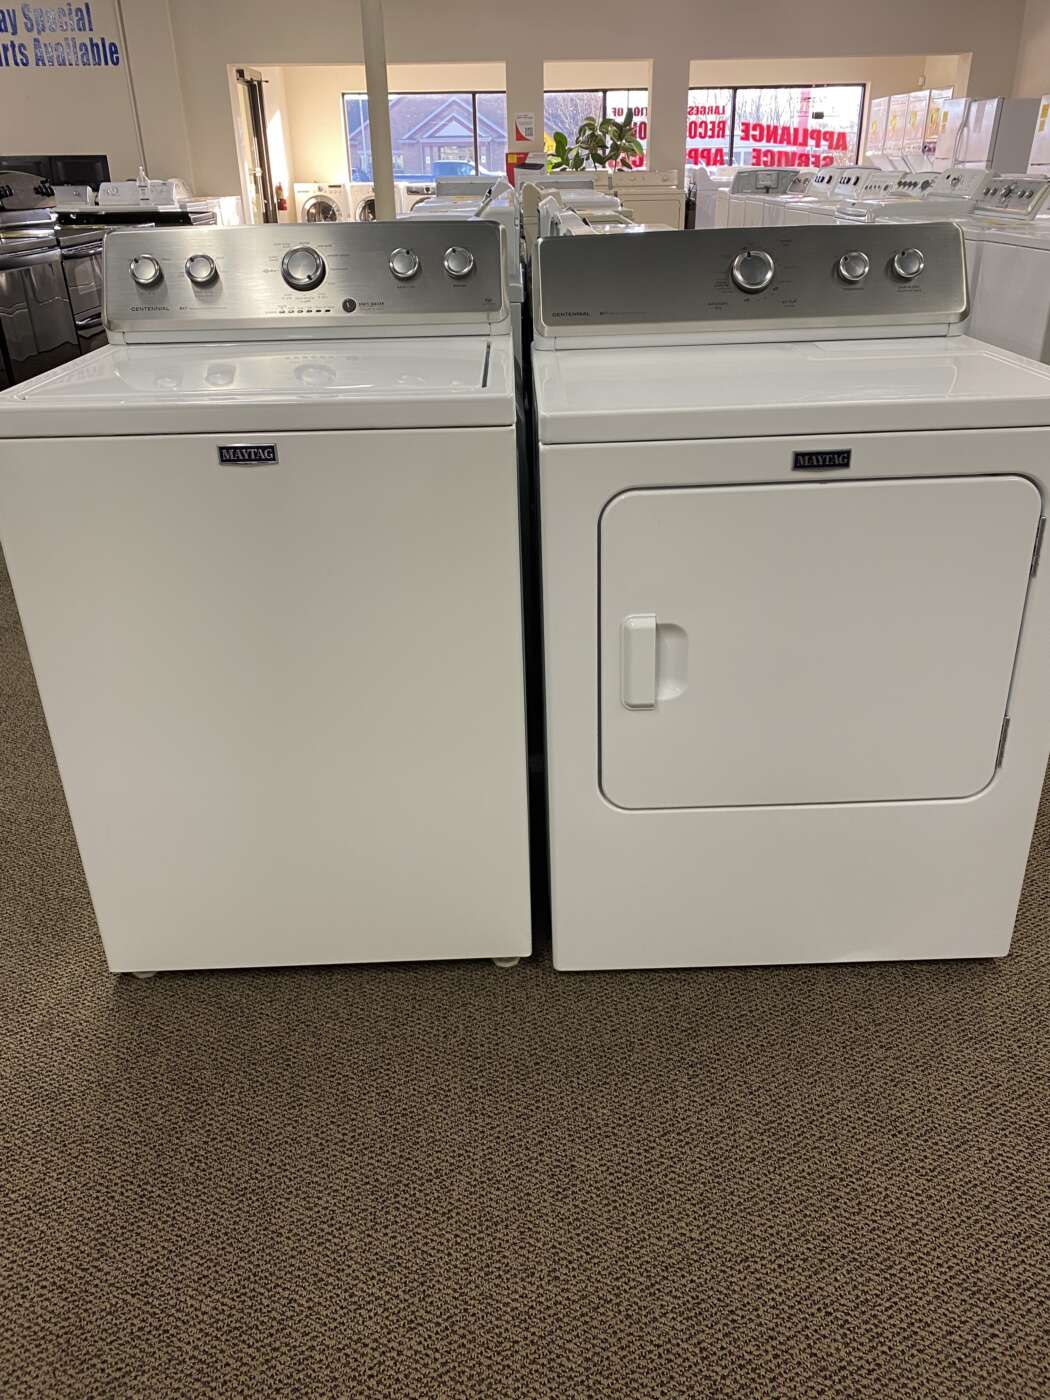 Reconditioned MAYTAG 3.6 Cu. Ft. Top-Load H/E Washer & 7.0 Cu. Ft. Electric Dryer – White